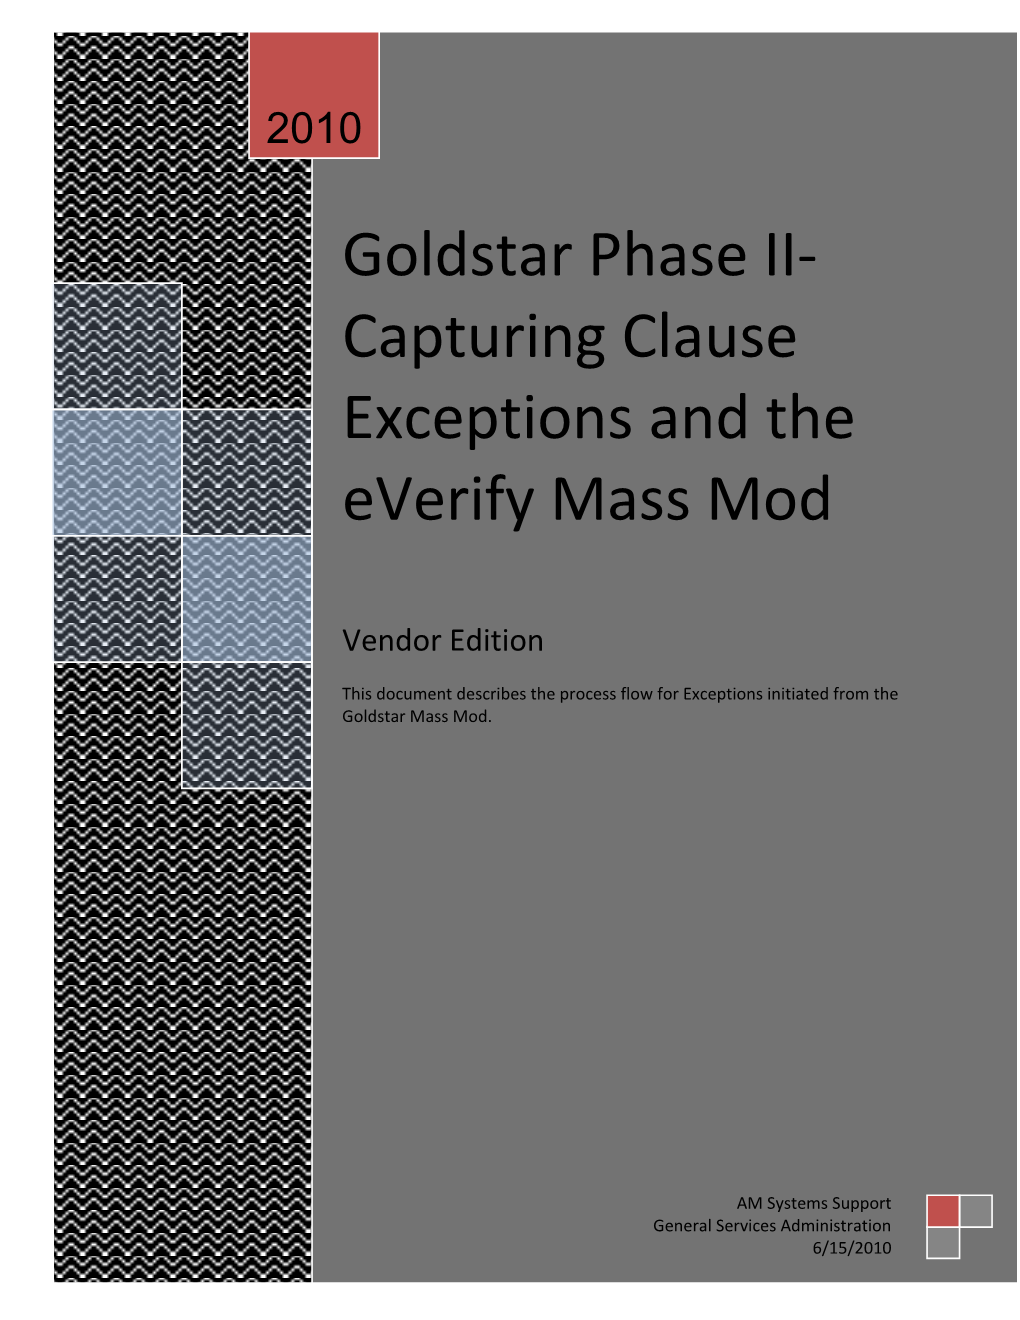 Capturing Clause Exception And Everify Mass Mod – Goldstar Phase II